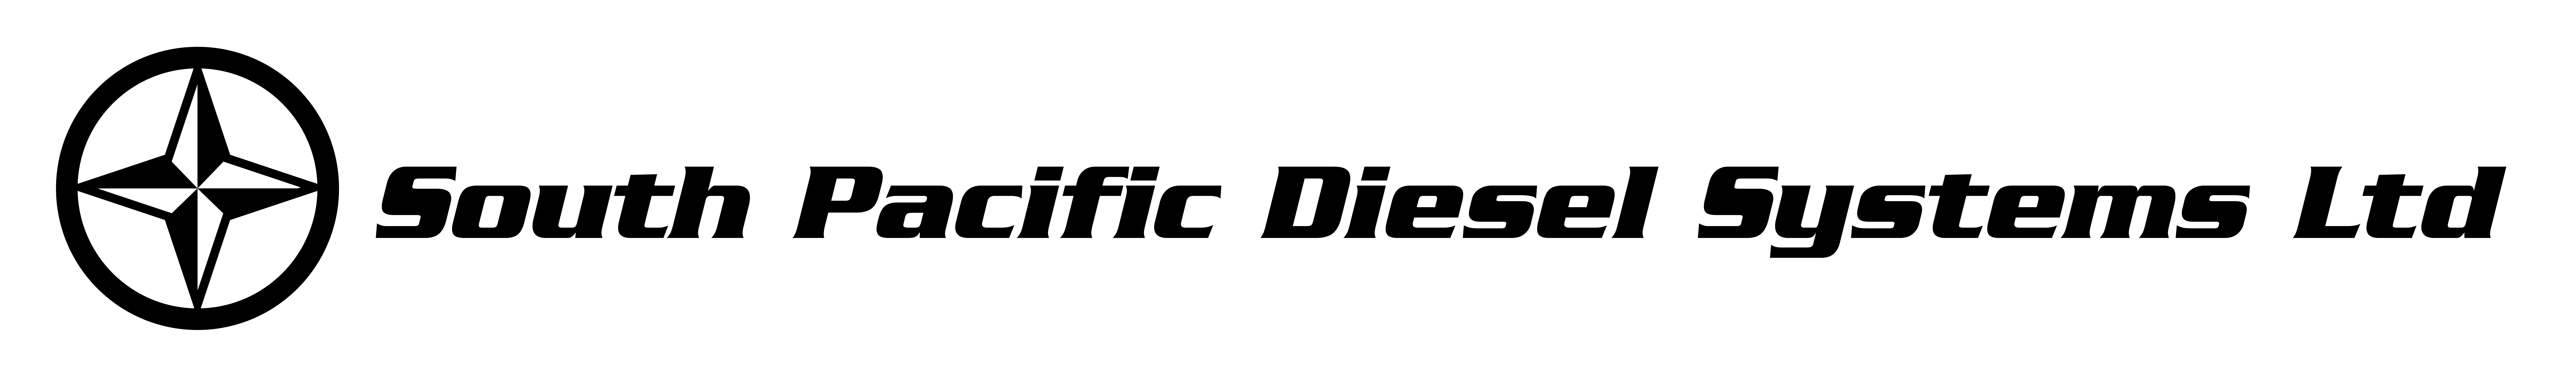 South Pacific Diesel Systems